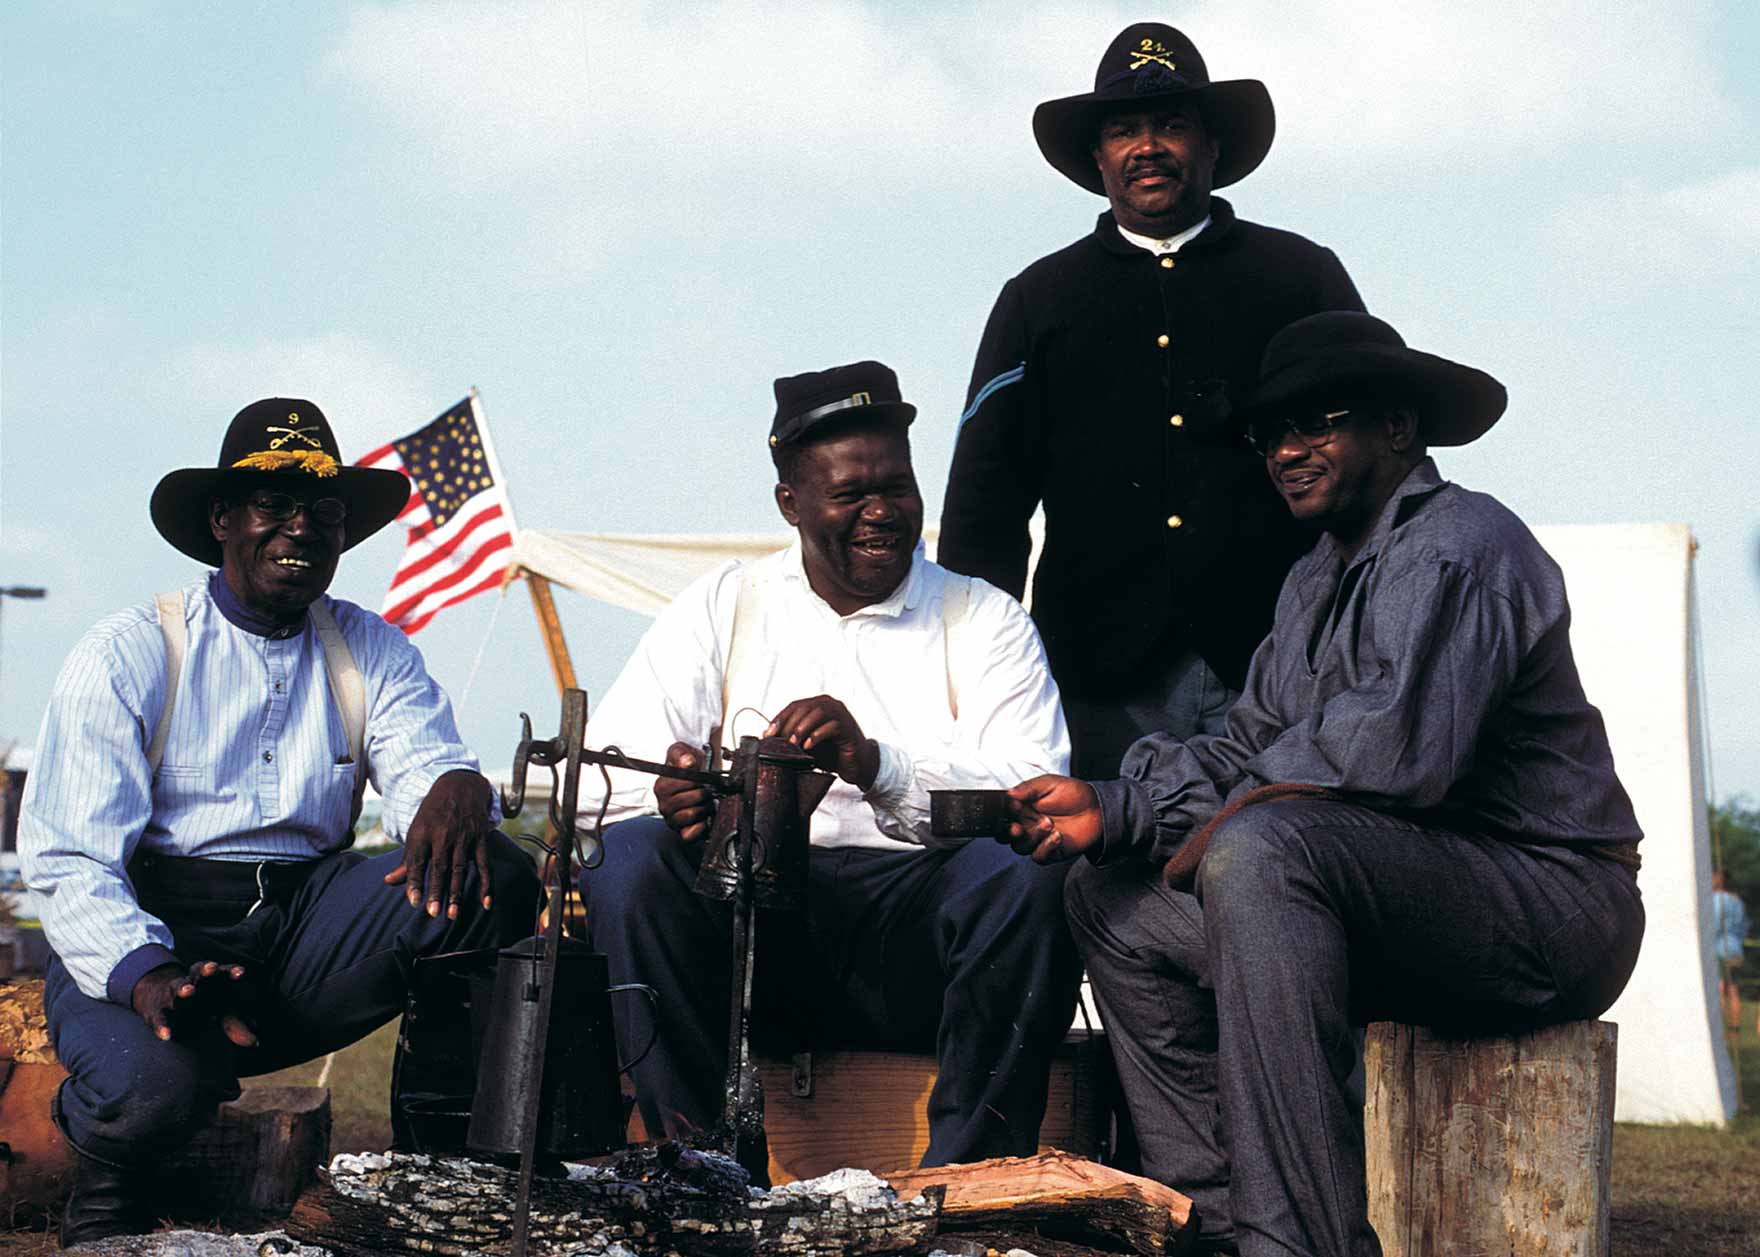 Buffalo Soldiers by campfire.